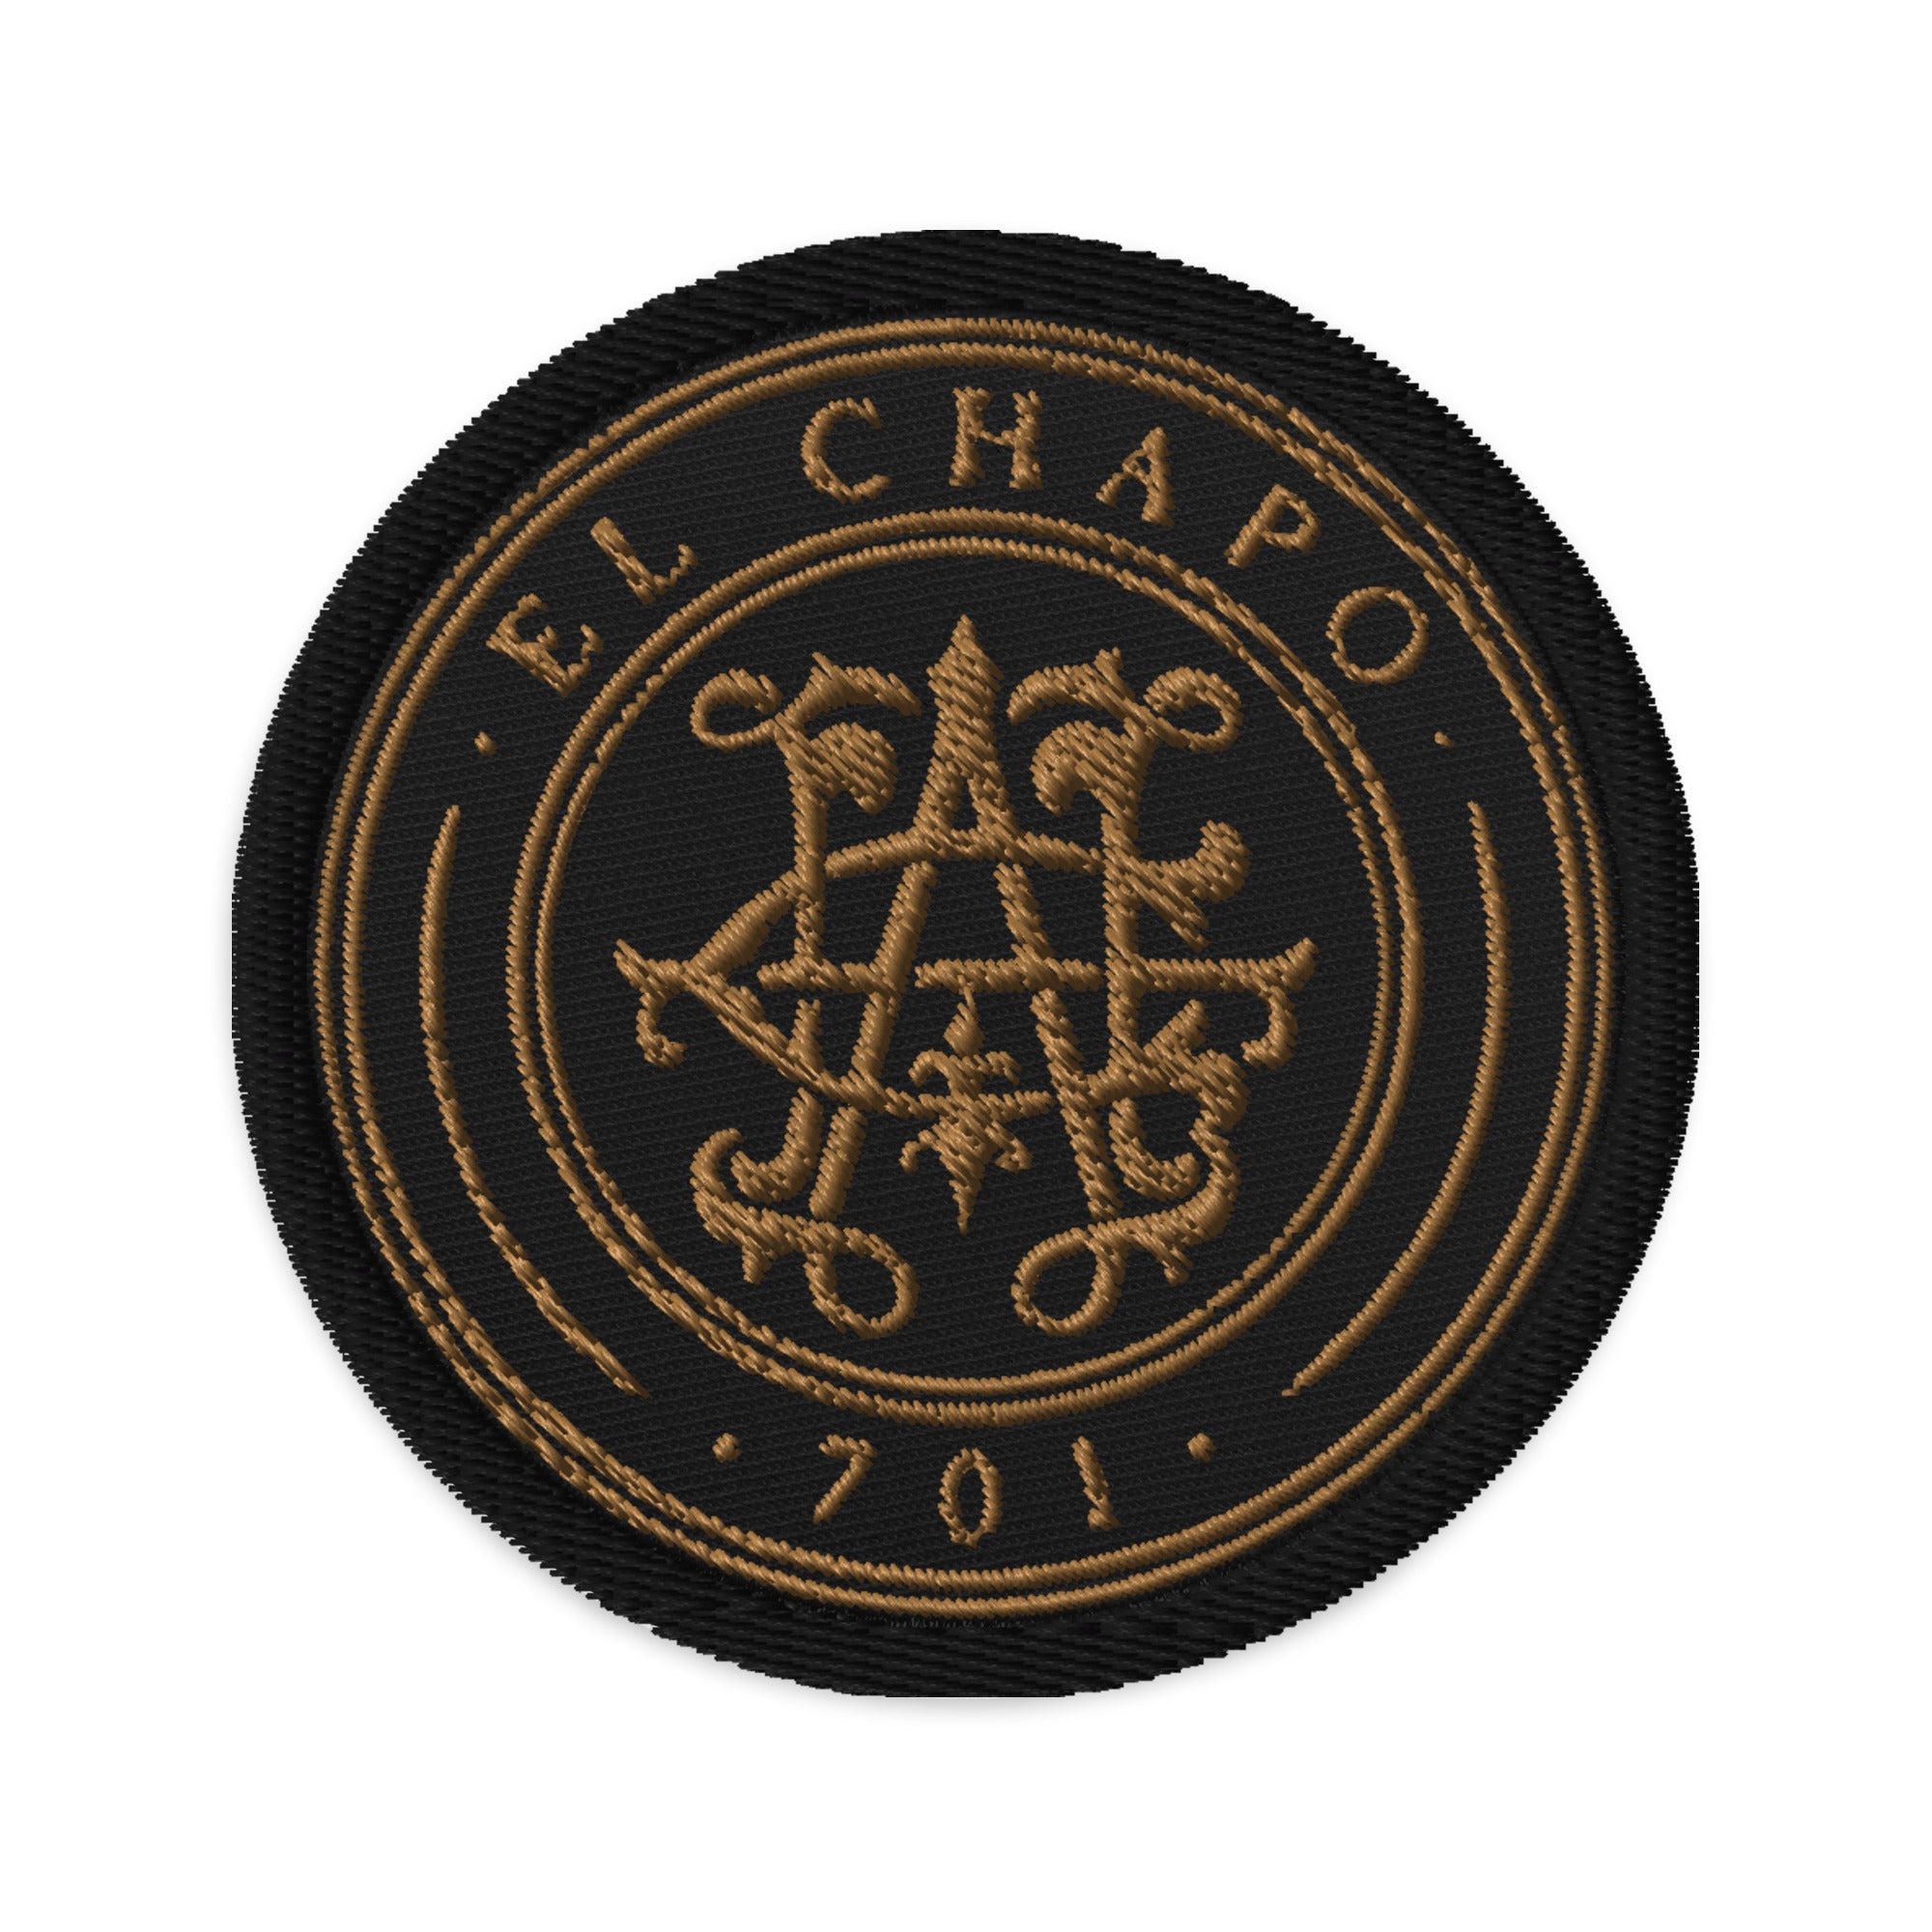 EL CHAPO 701 EMBROIDERED PATCH – CARTEL CLUB